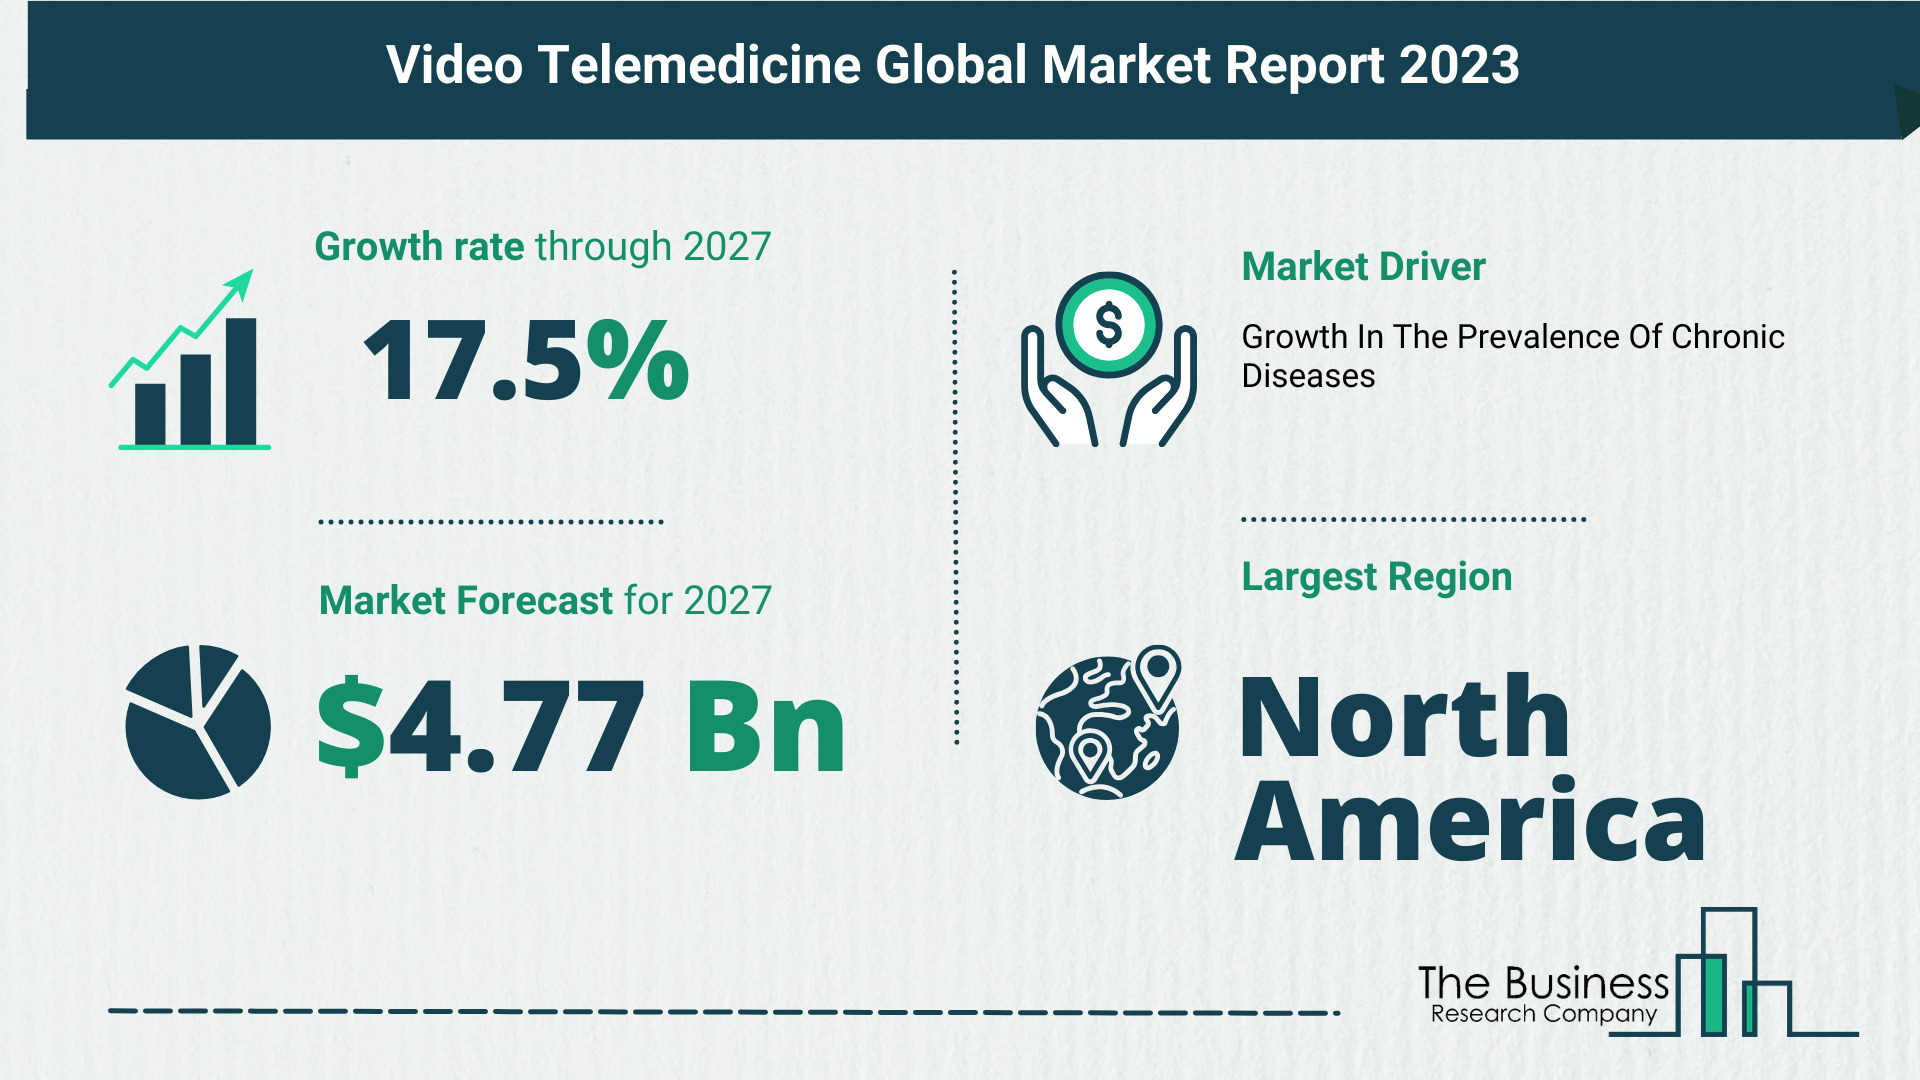 Top 5 Insights From The Video Telemedicine Market Report 2023